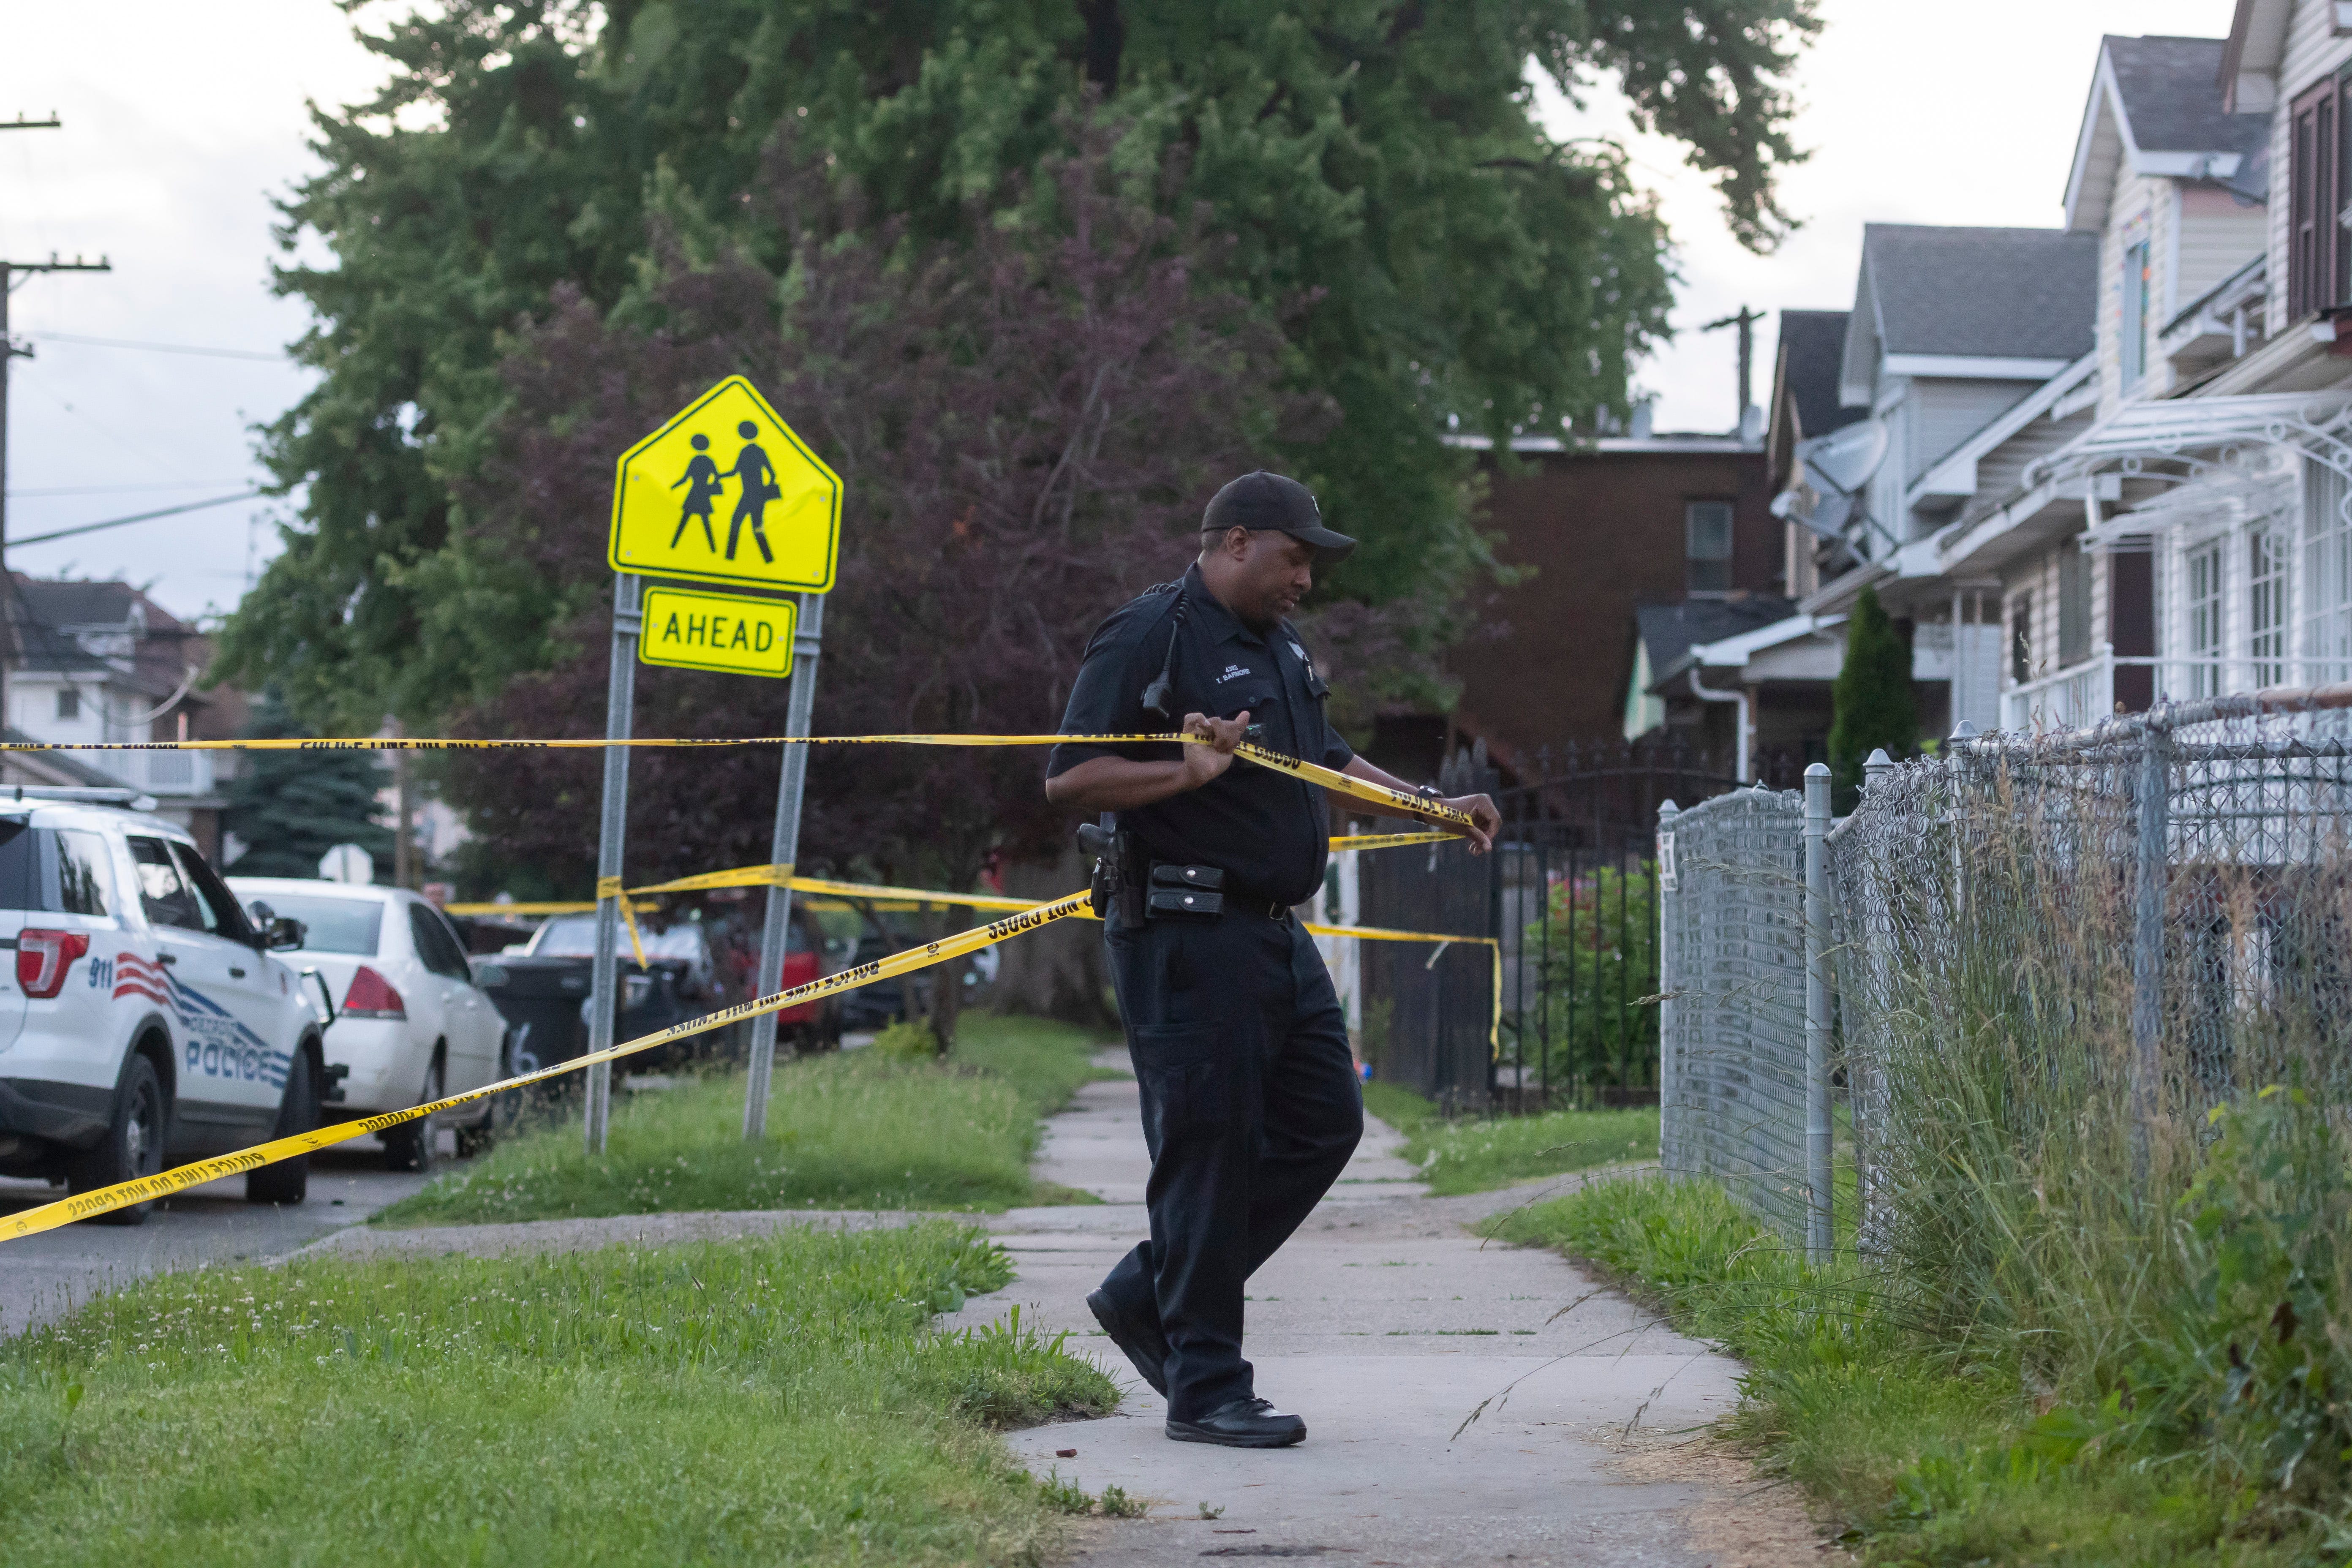 A Detroit police officer secures the scene with tape during the investigation of a shooting on the 2400 block of Honorah, in Detroit, June 20, 2019. The attempted robbery on the city's southwest side left the suspect dead and a 15-year-old seriously injured.